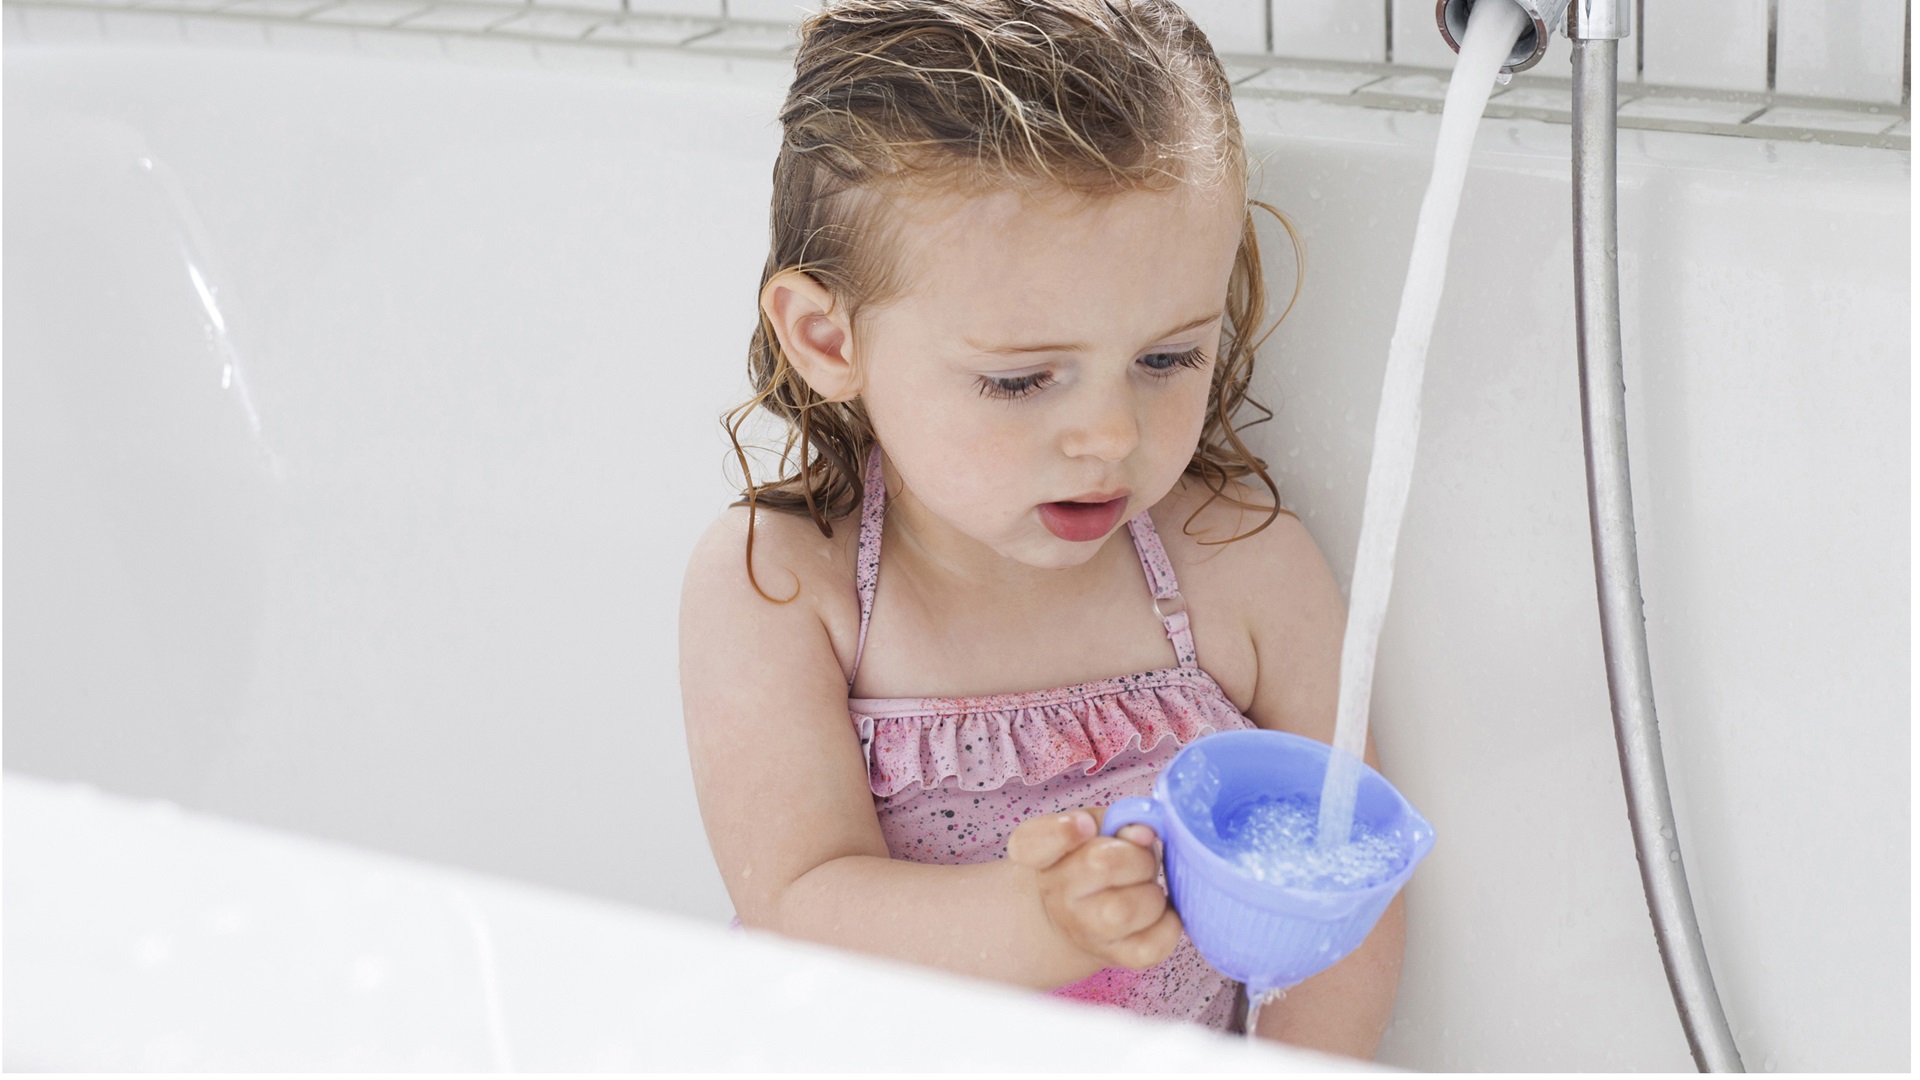 Little girl in bath tub with cup, running water, Water segment